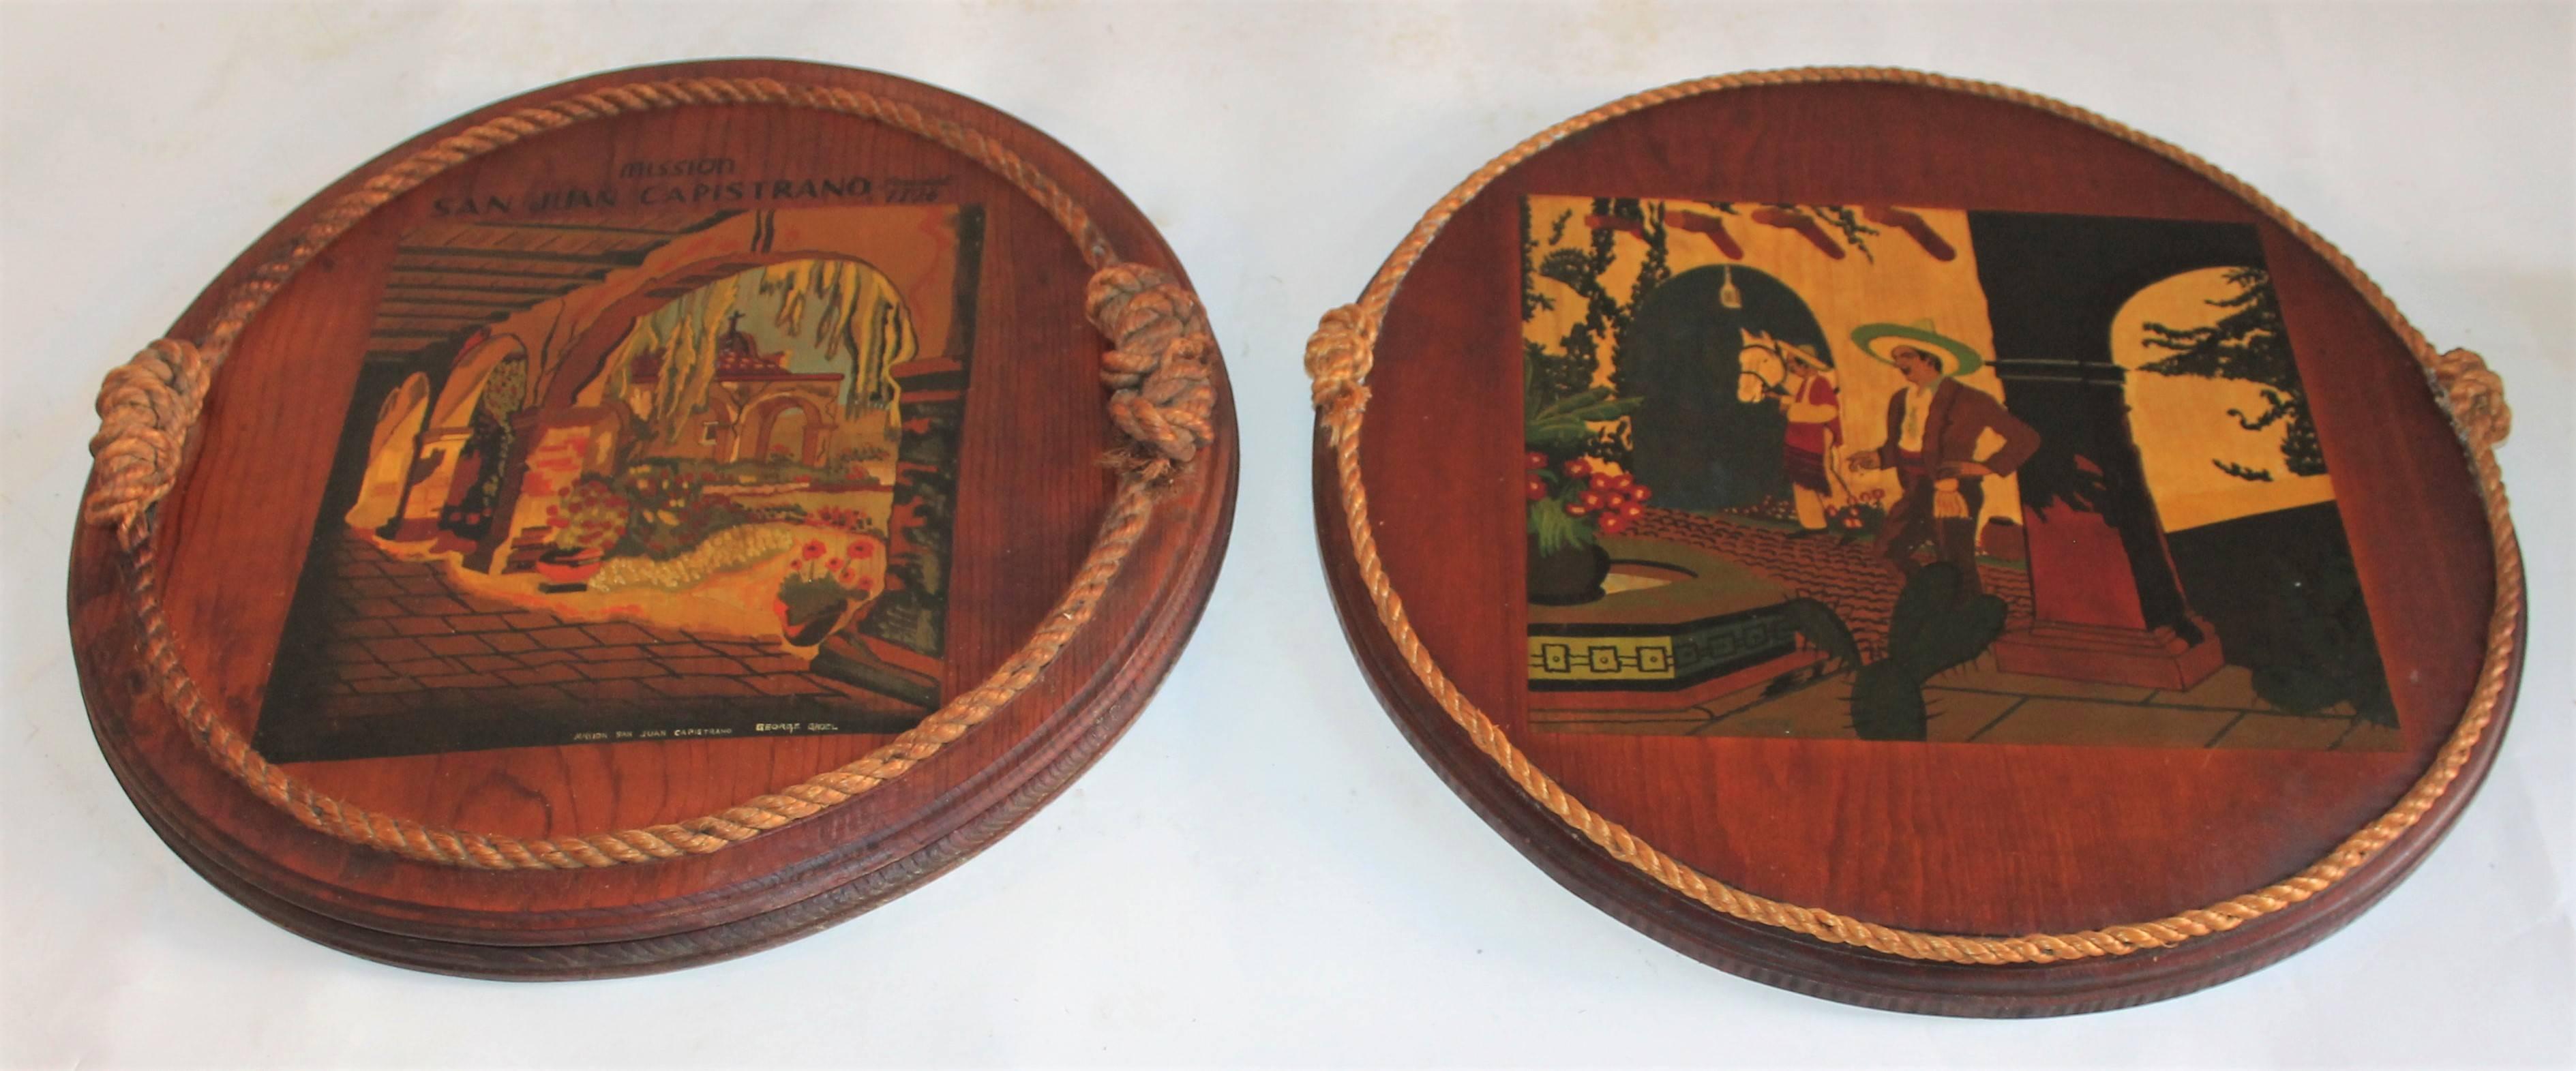 Pair of fantastic original painted wood plaques with Mexican hacienda scenes and signed by the artist 